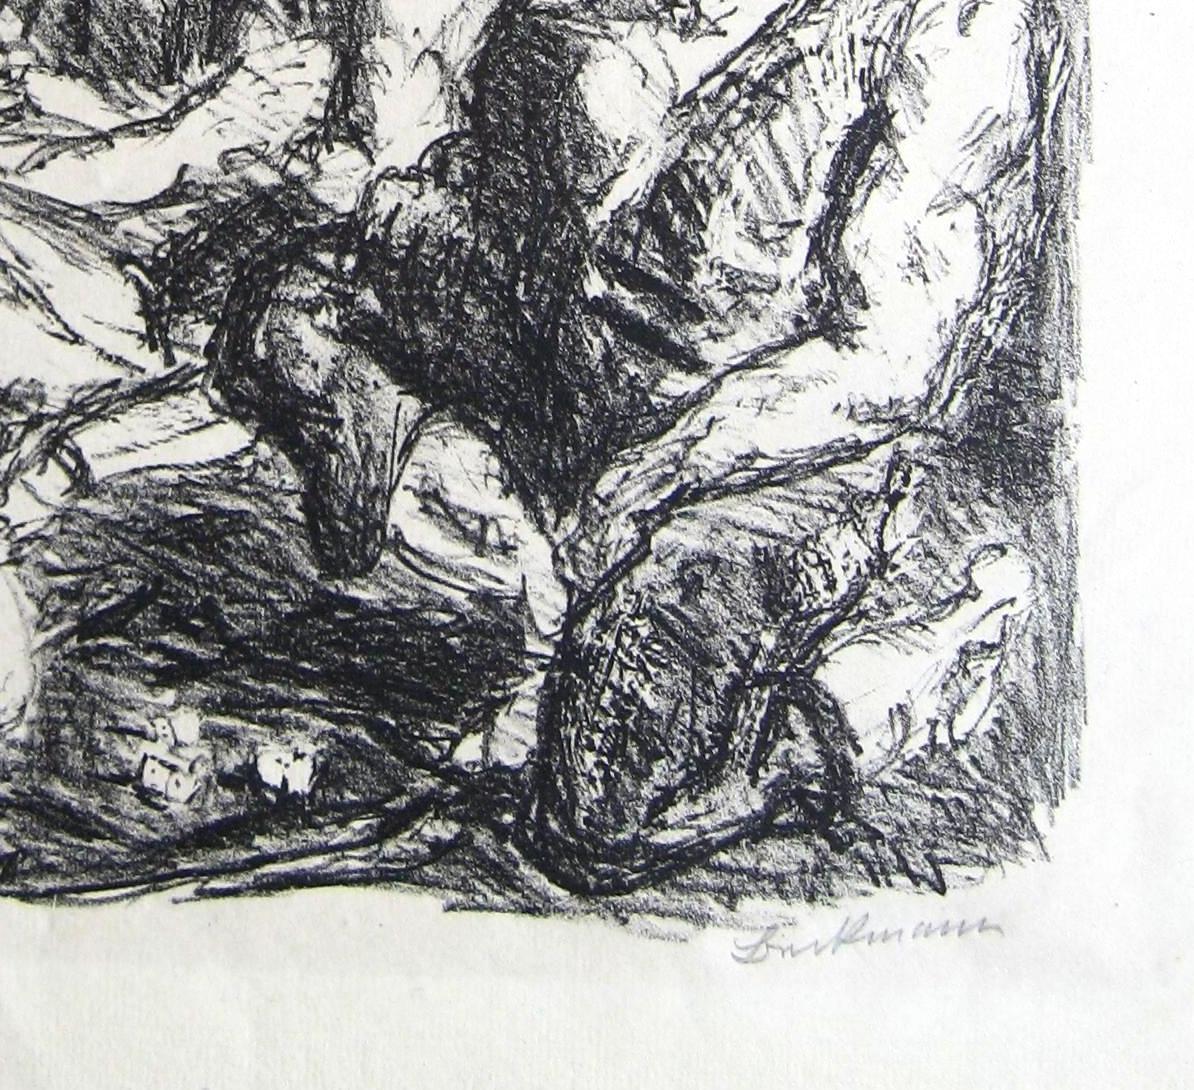 Original stone lithograph and a powerful image by German Expressionist Max Beckmann.
Titled 